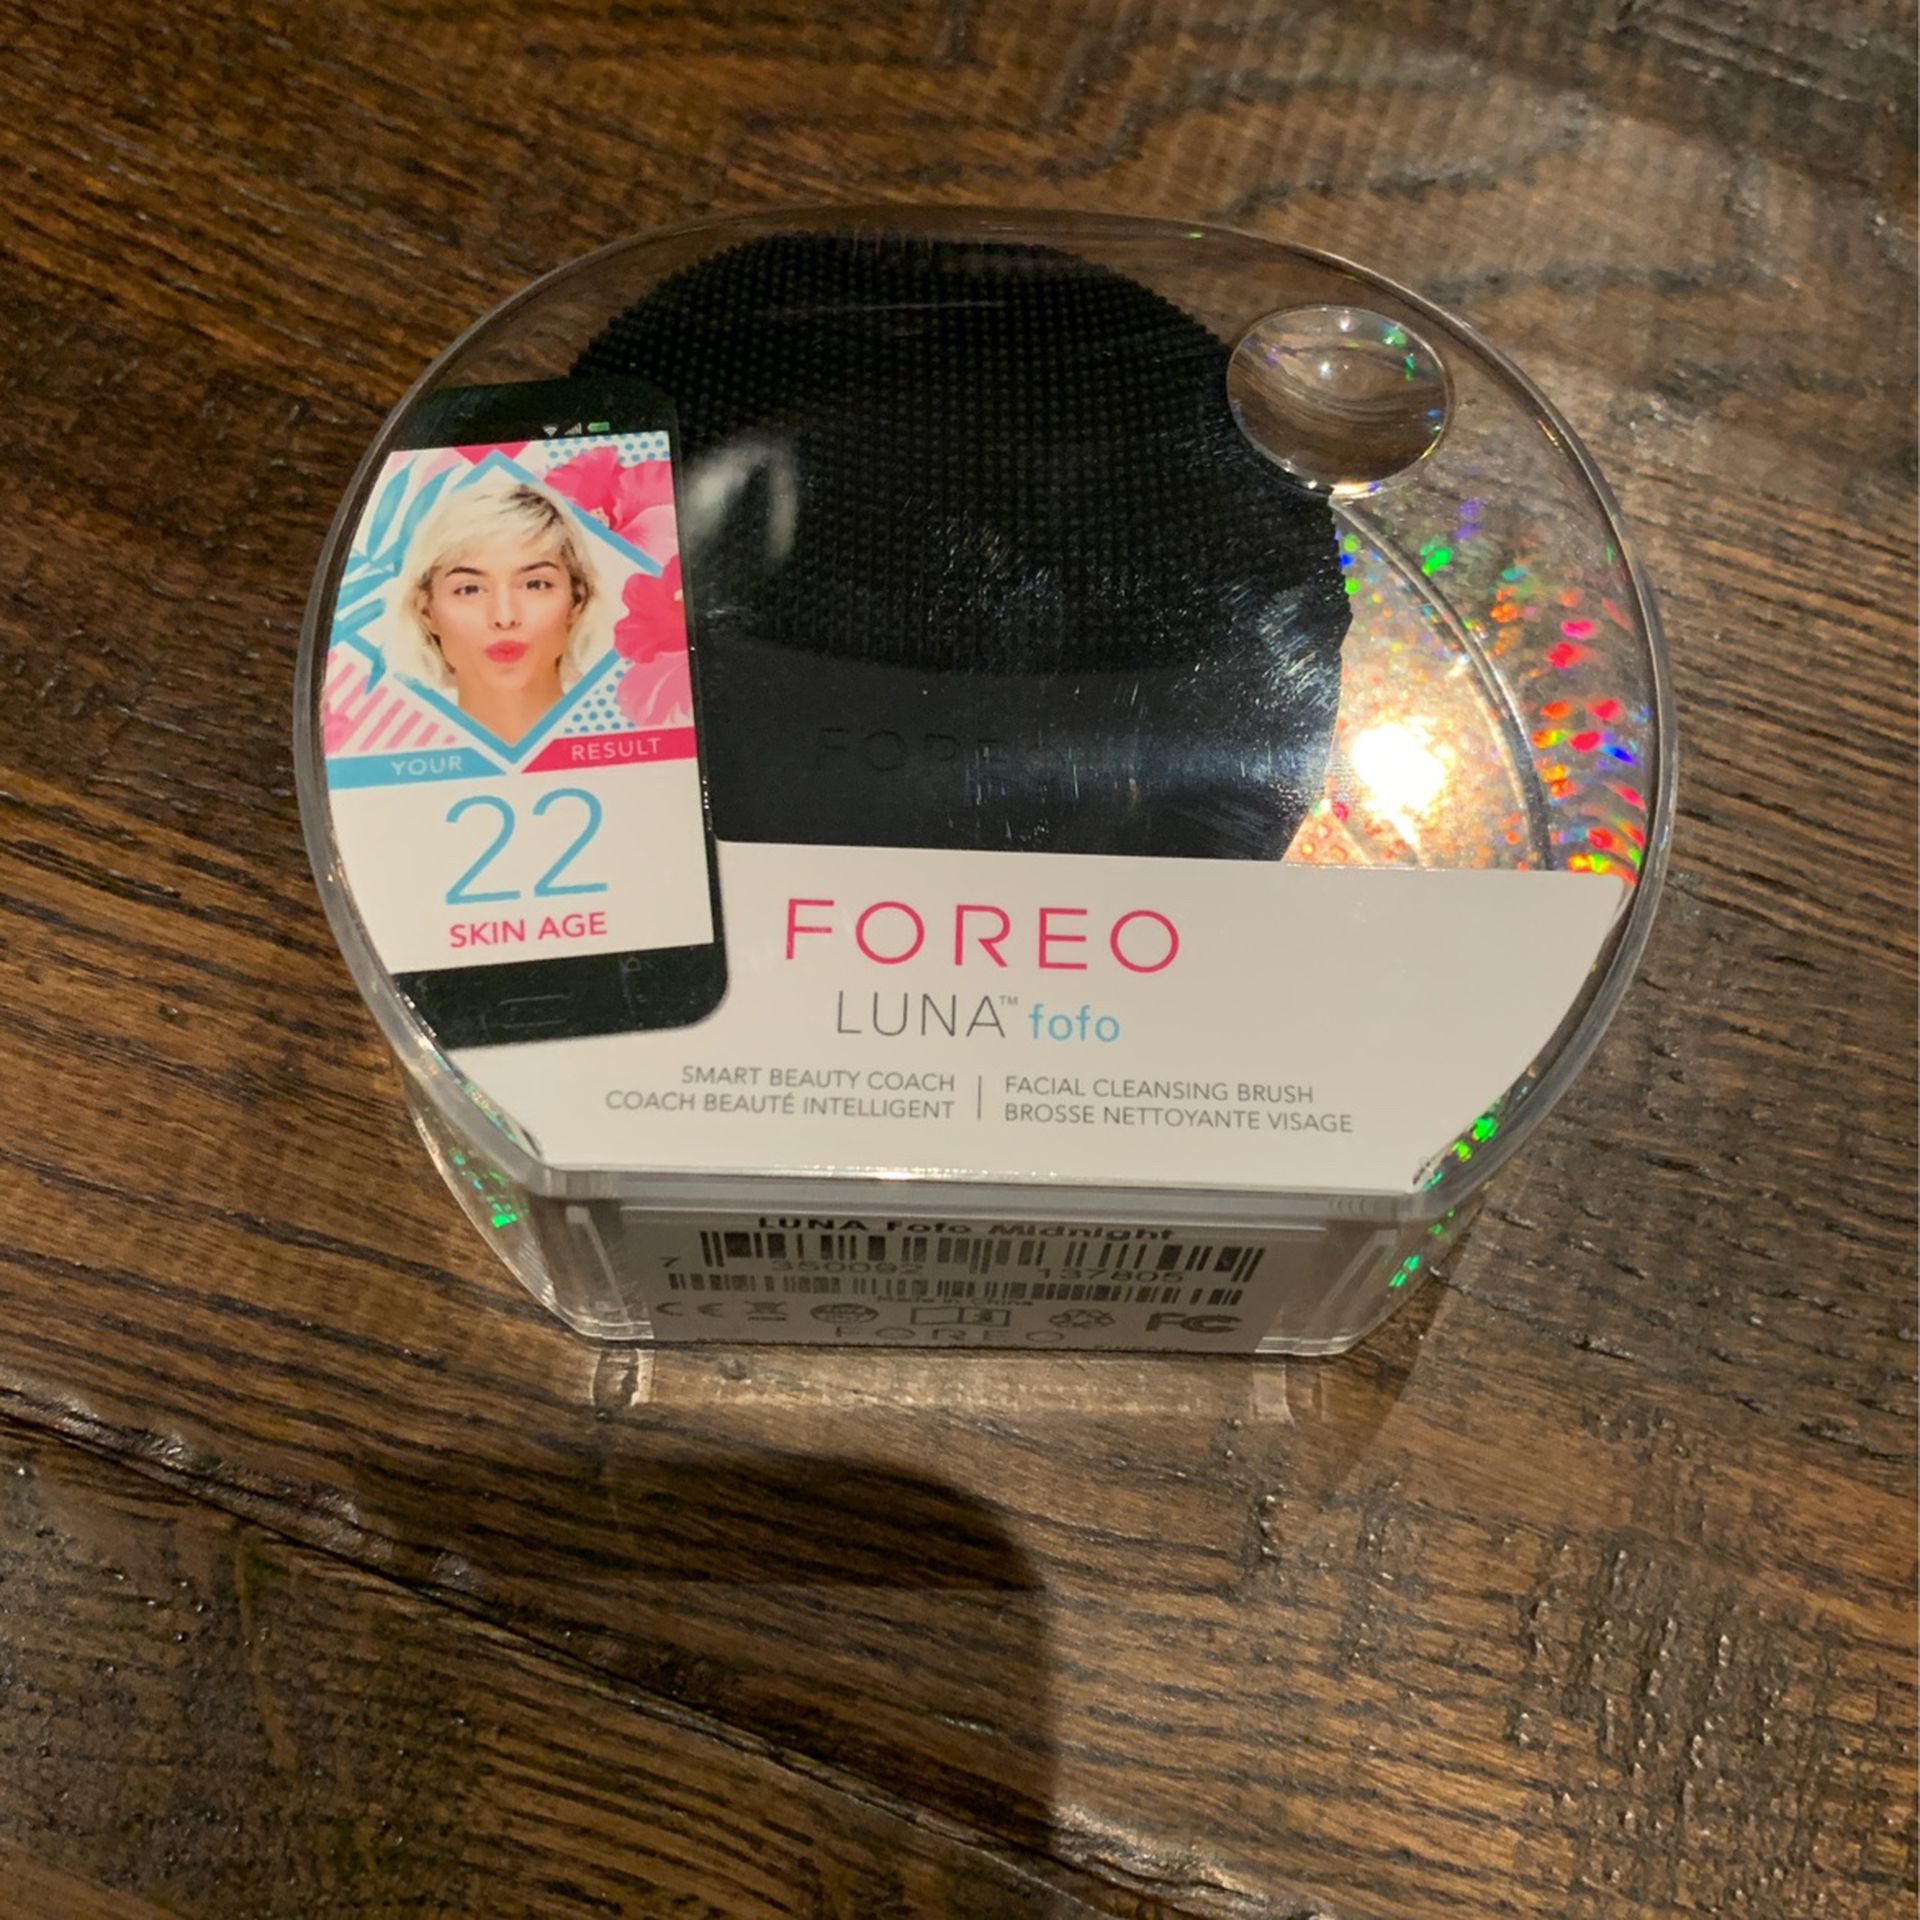 Brand New Never Opened FOREO LUNA fofo Smart Beauty Cleaning Brush (89 Dallors Value) 